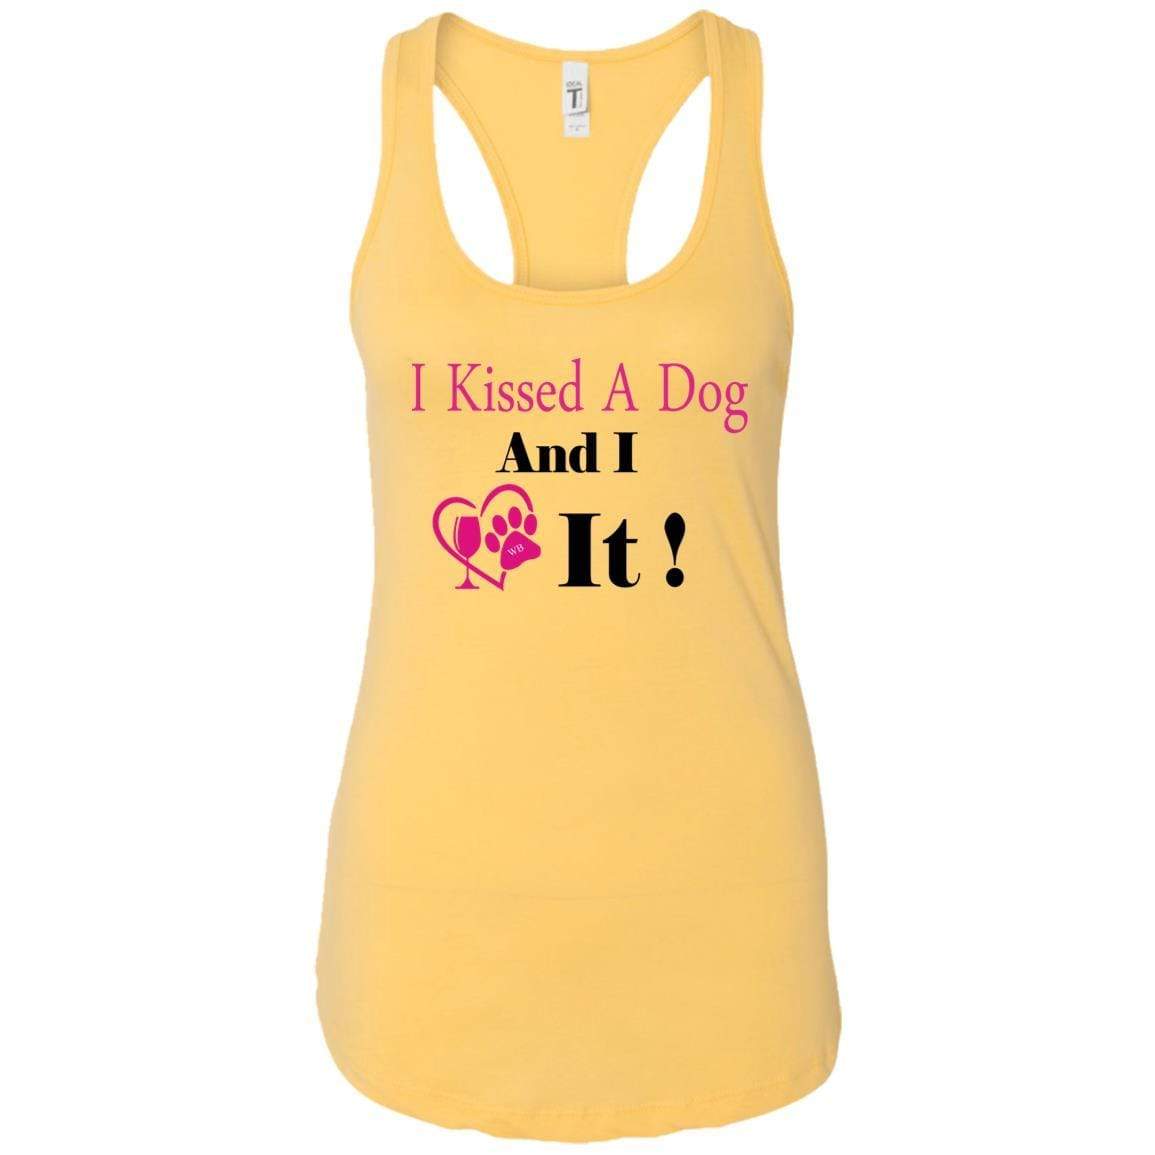 Tank Top Banana Cream / X-Small WineyBitches.co "I Kissed A Dog And I Loved It:" Ladies Ideal Racerback Tank WineyBitchesCo